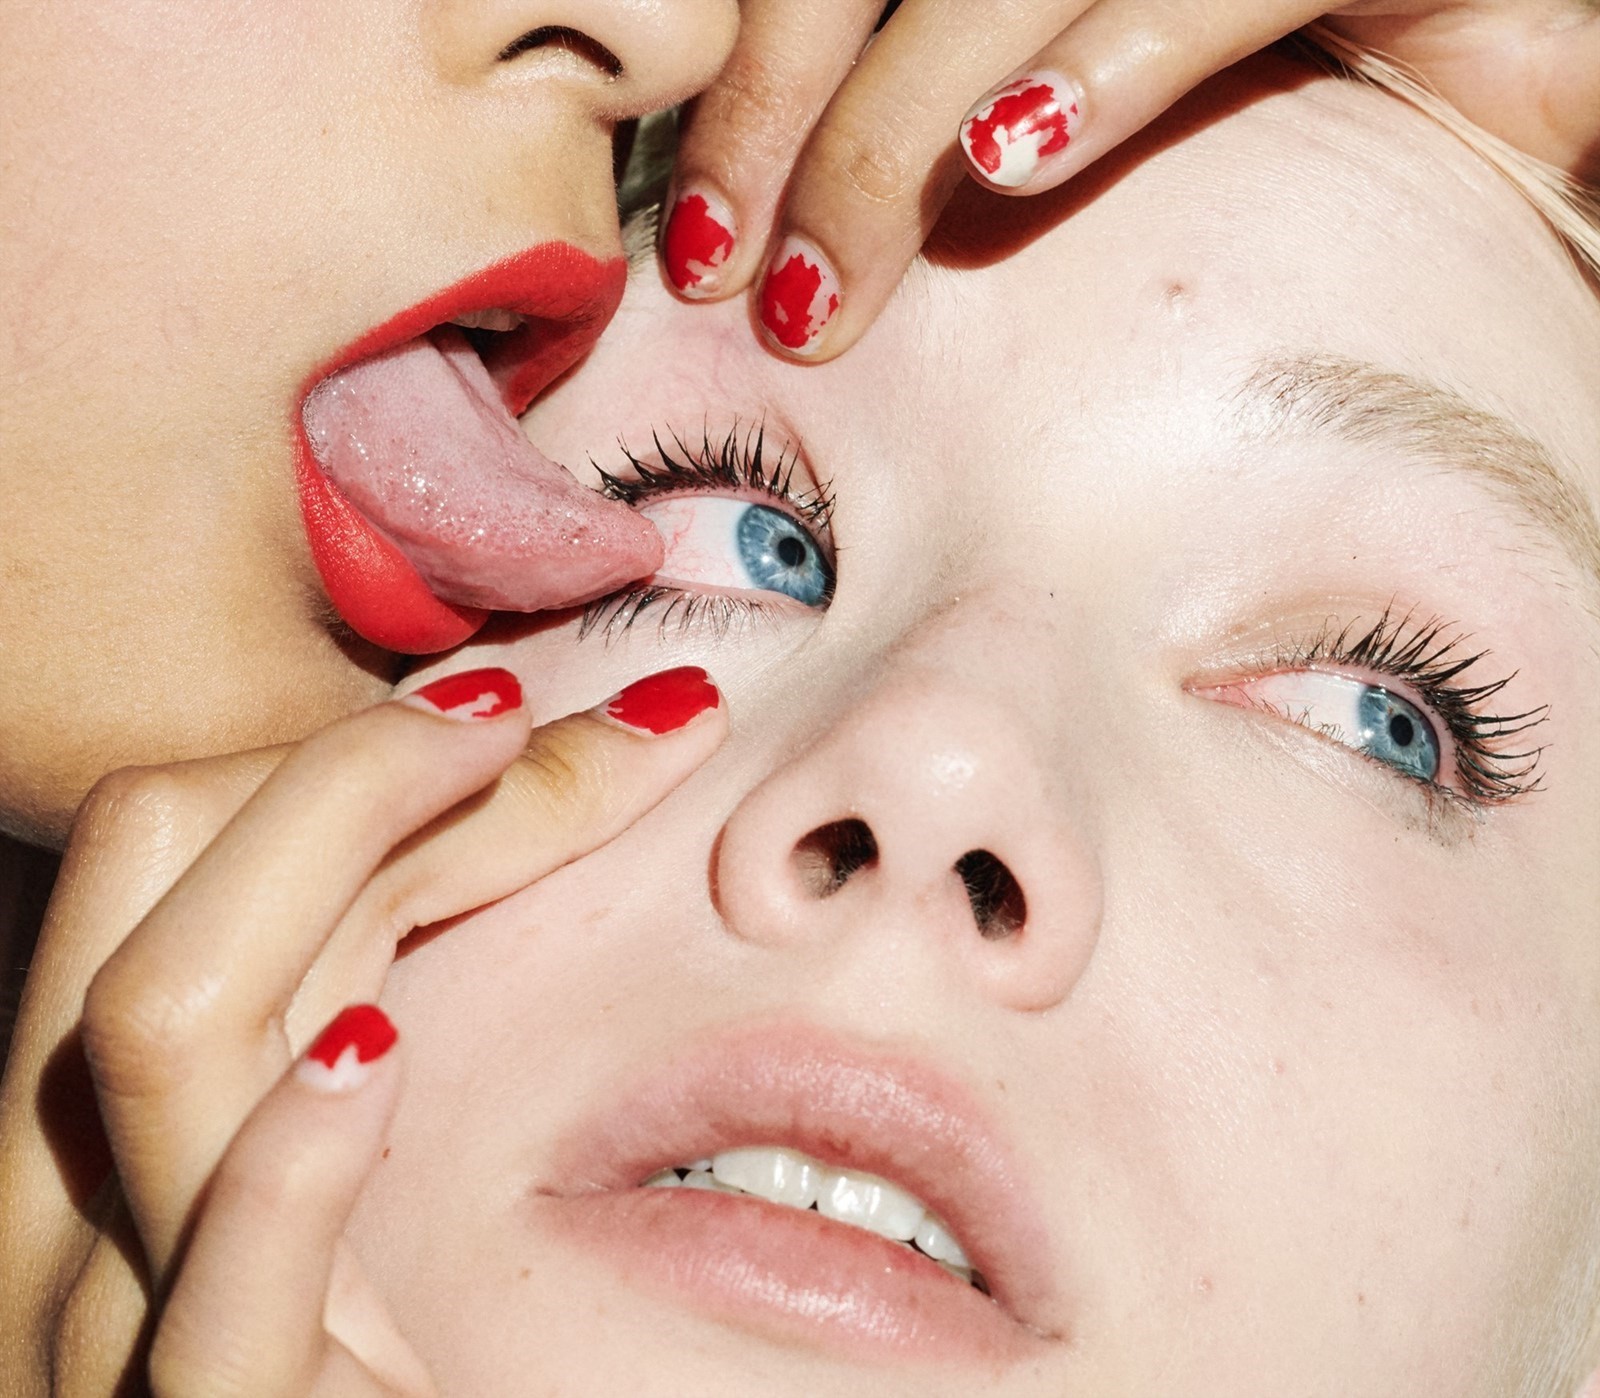 We speak to the people who get off on licking eye balls Dazed